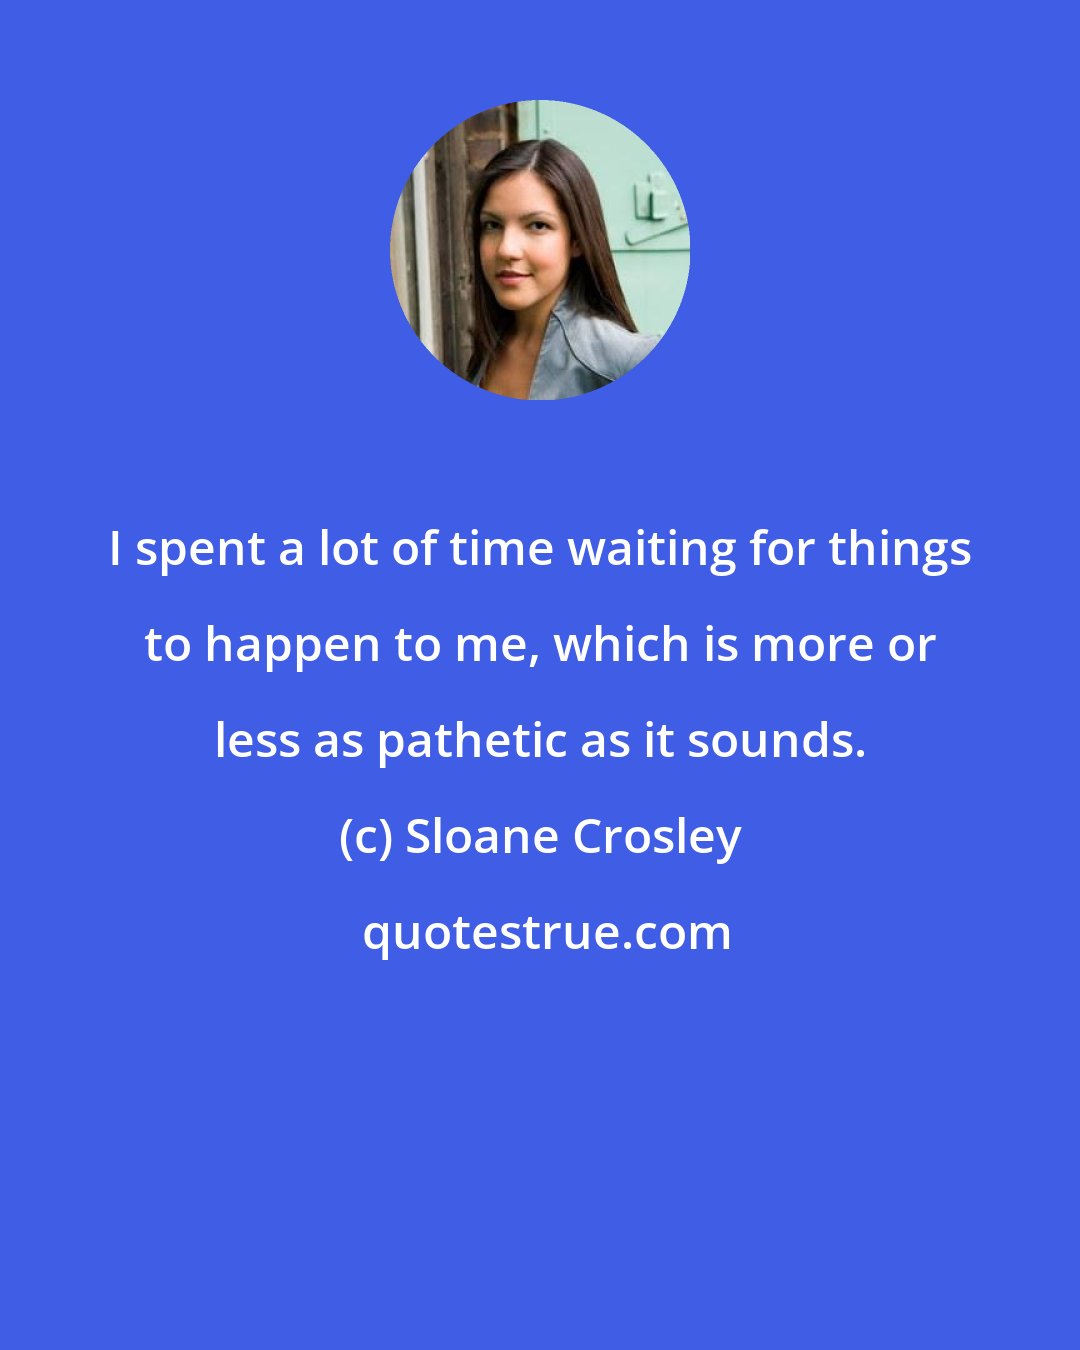 Sloane Crosley: I spent a lot of time waiting for things to happen to me, which is more or less as pathetic as it sounds.